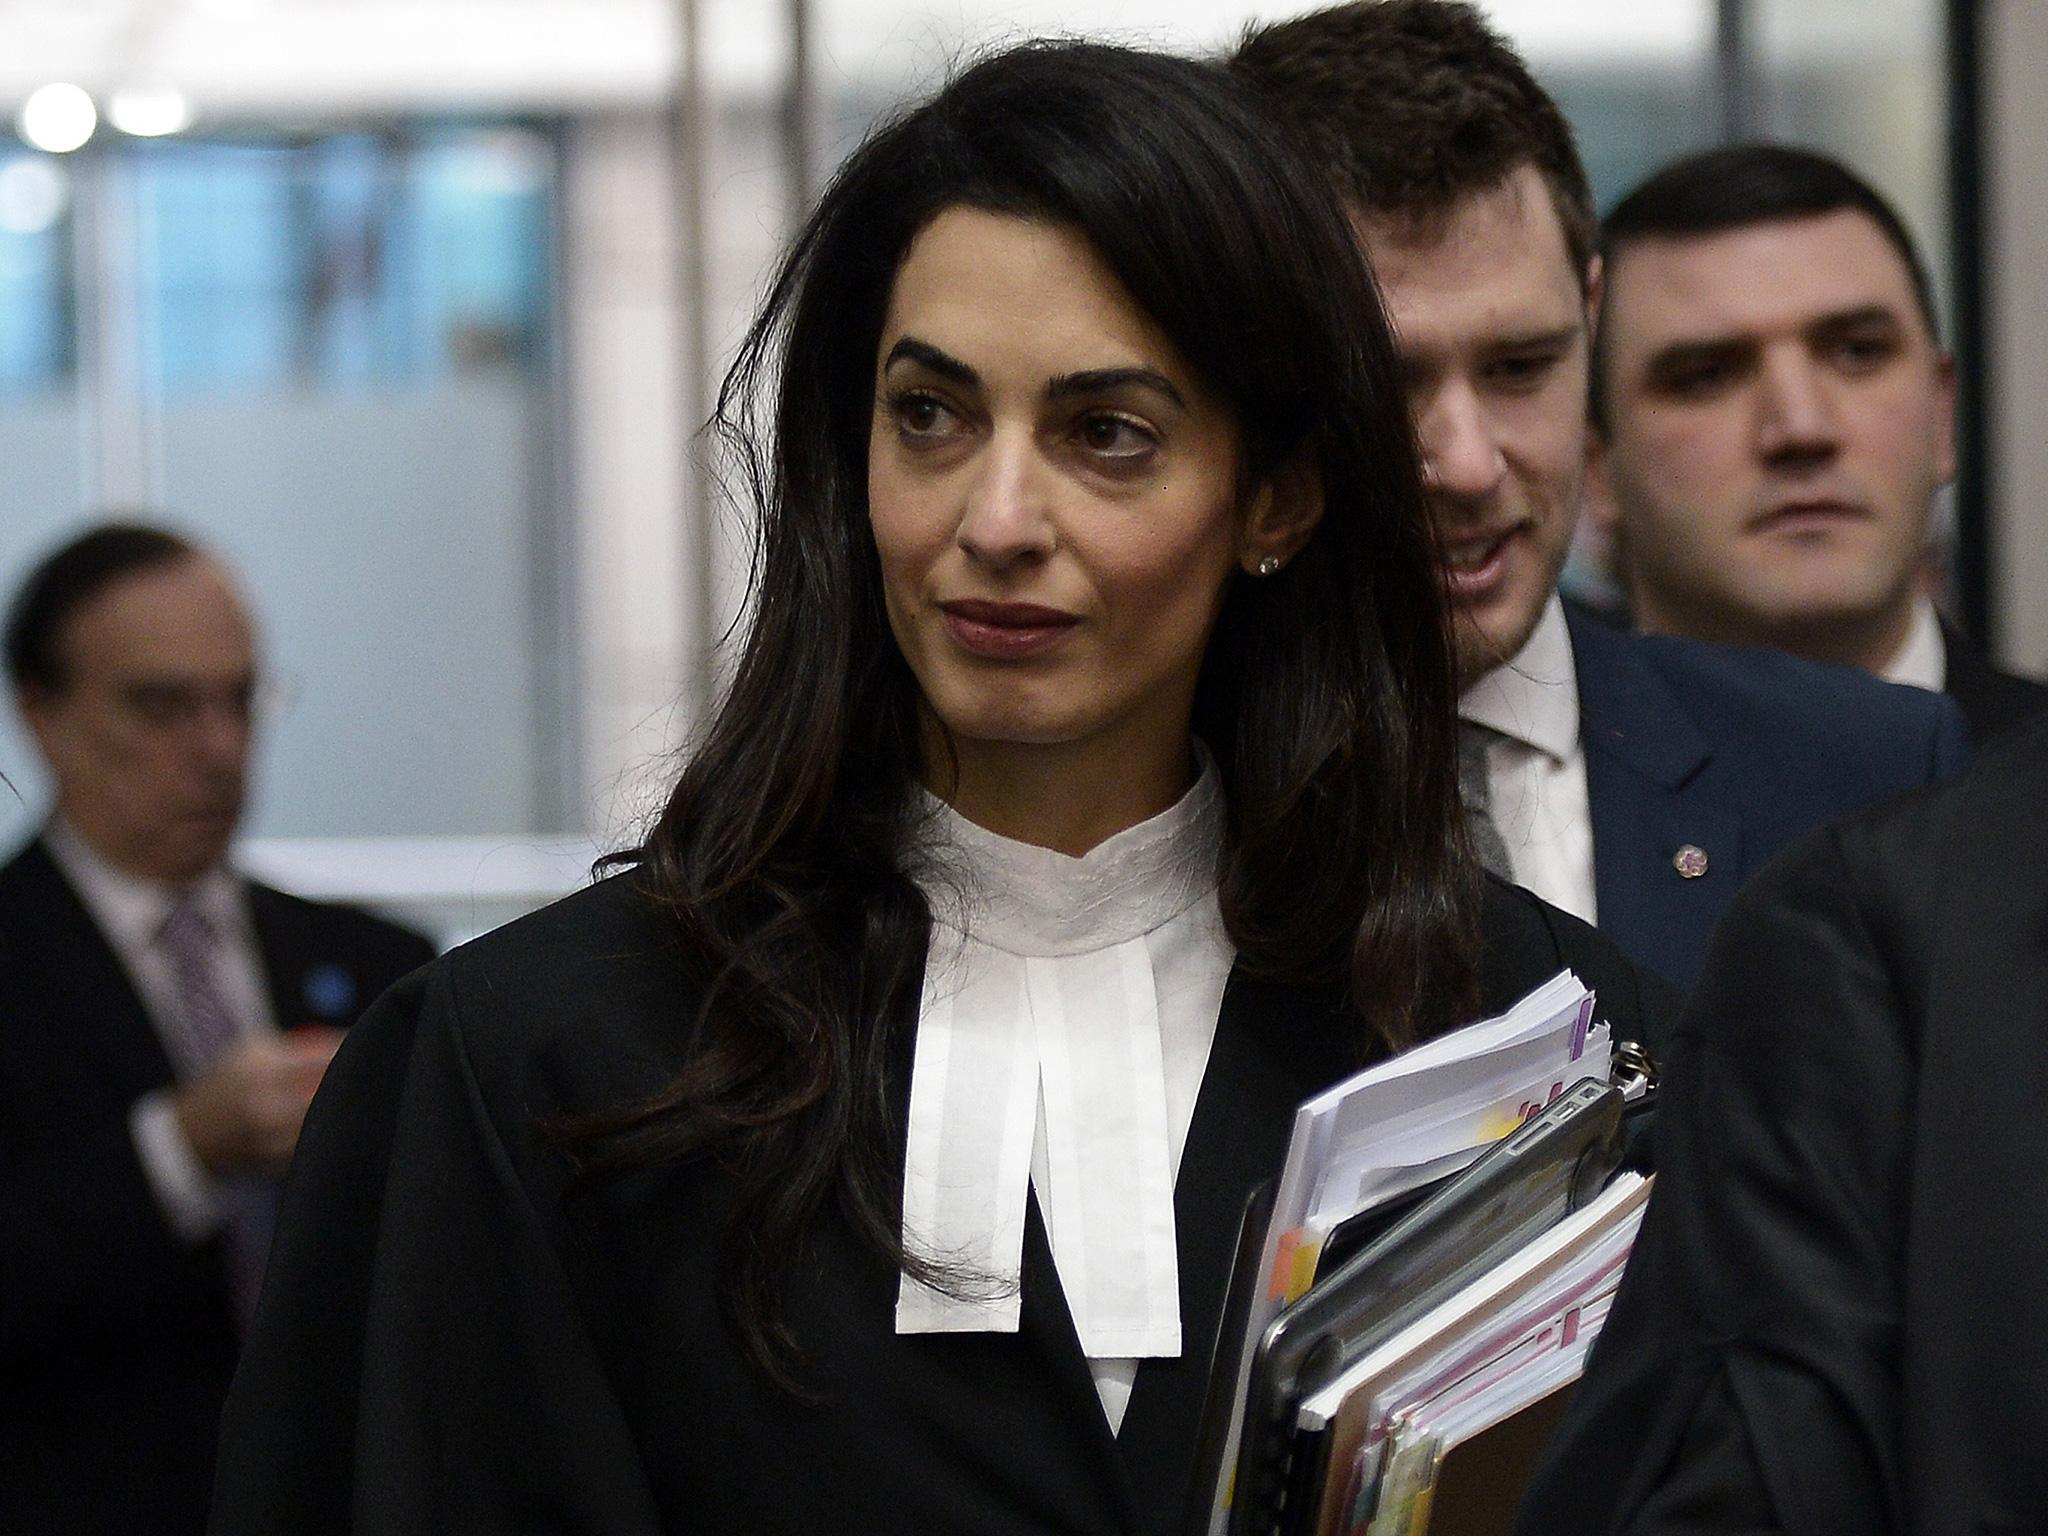 David Starkey tells Amal Clooney to shut up and stop over-promoting human rights The Independent The Independent